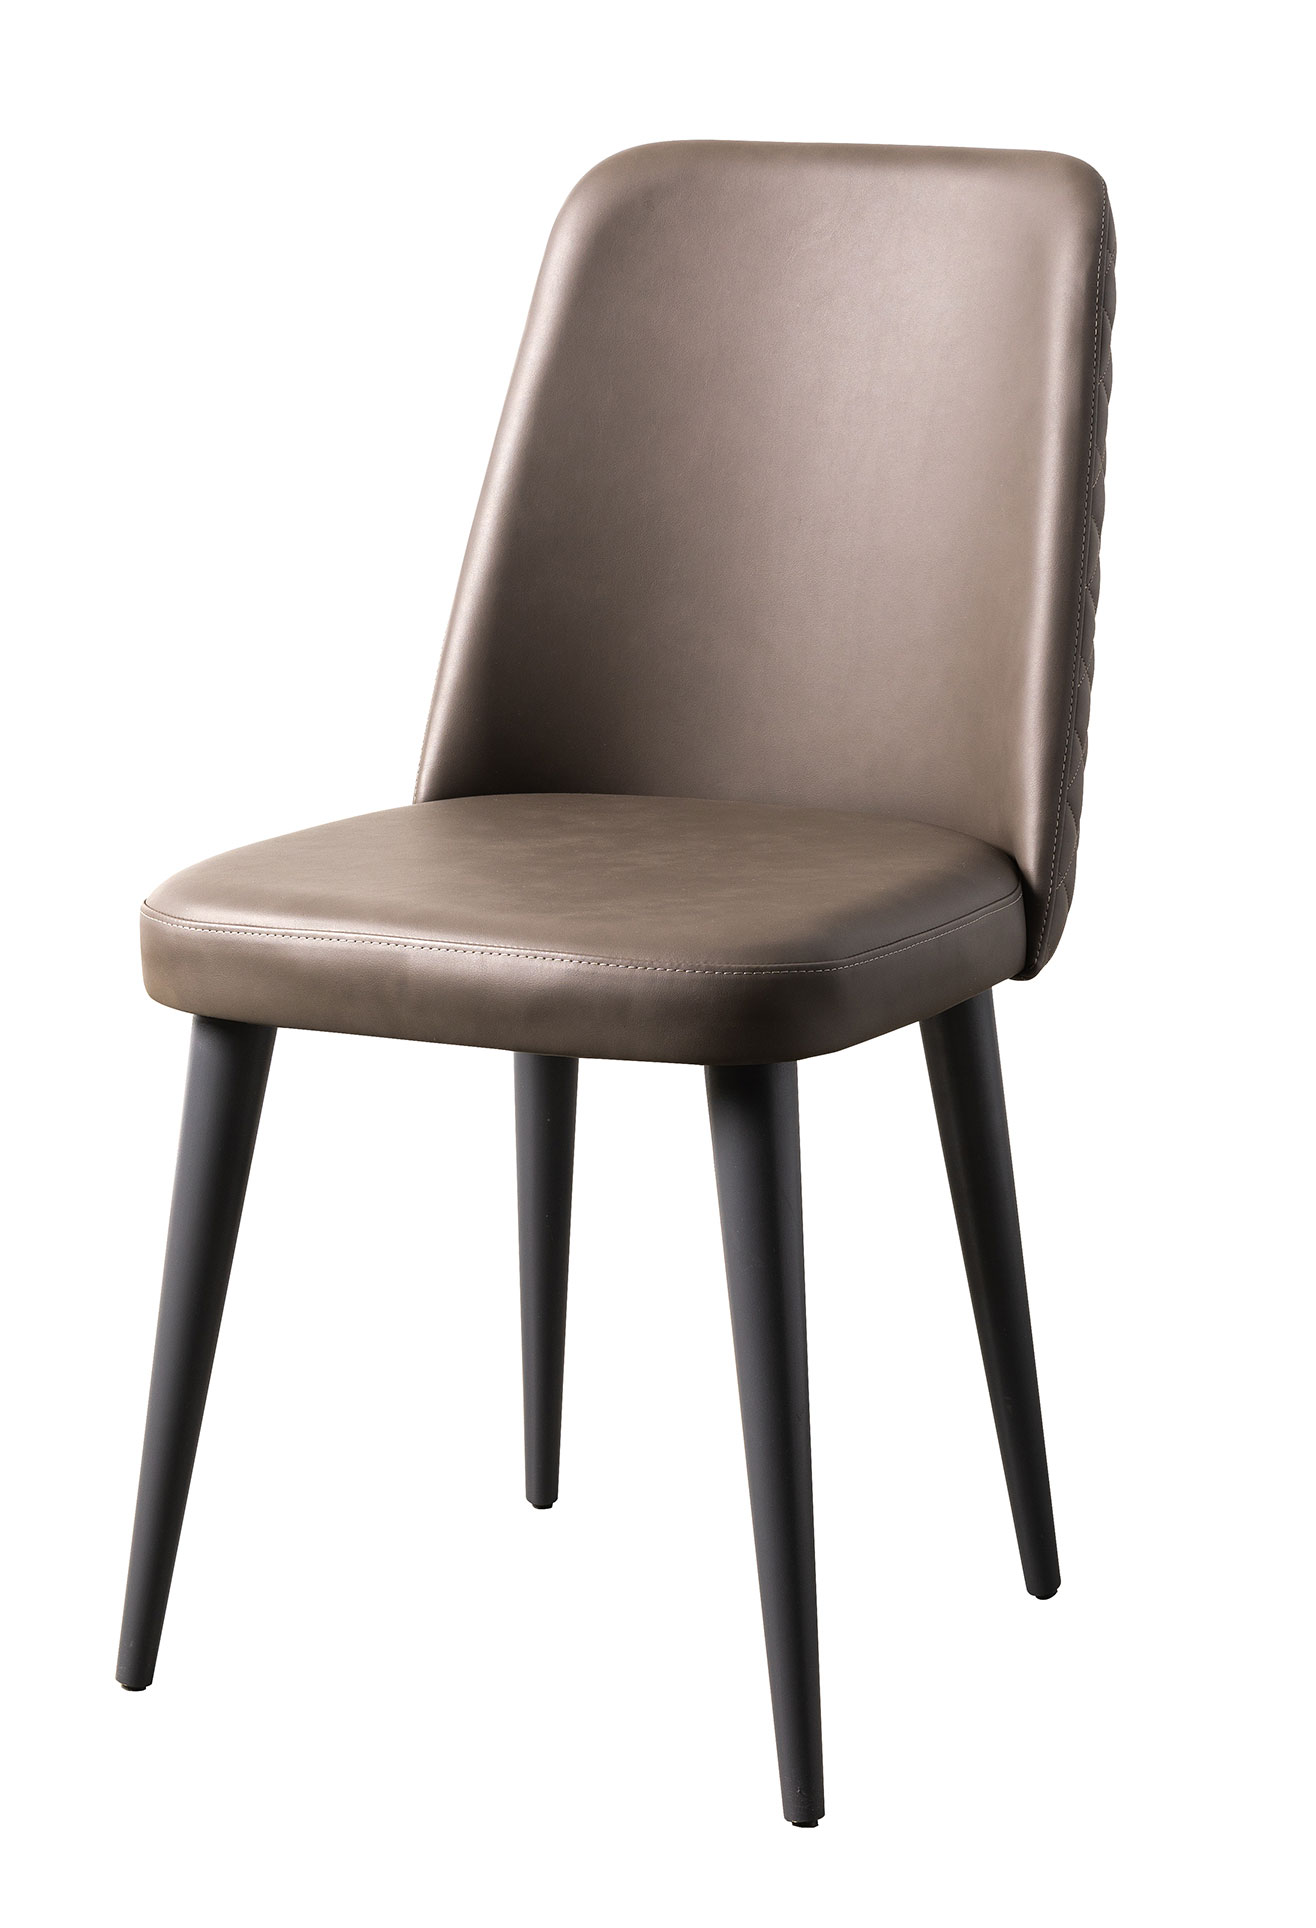 Clearance Dining Room Nora Chair